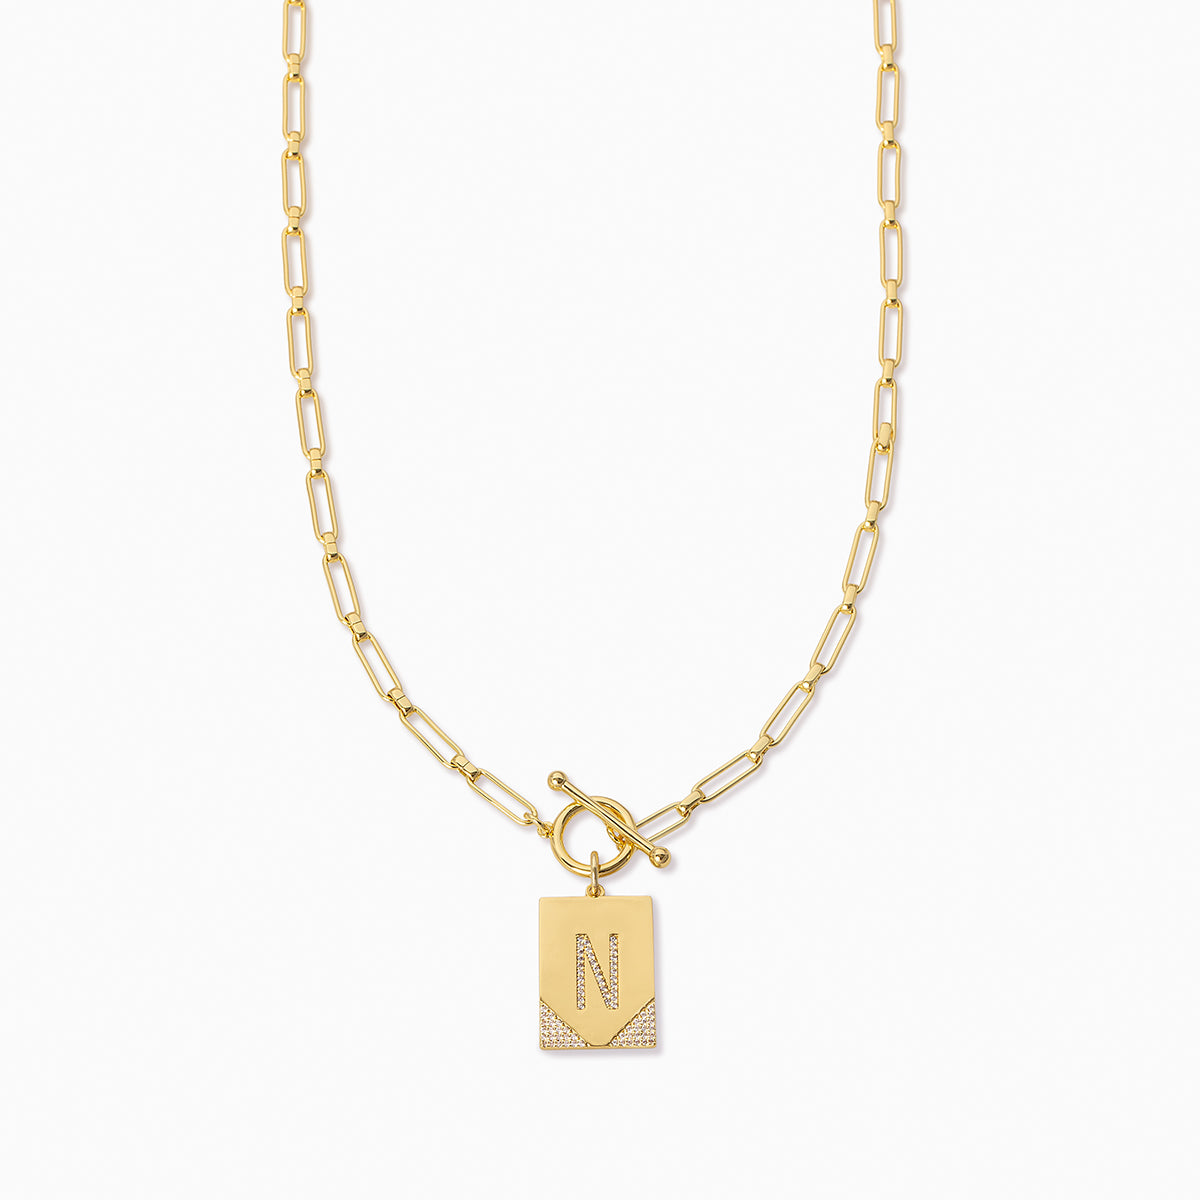 Leave Your Mark Chain Necklace | Gold N | Product Image | Uncommon James